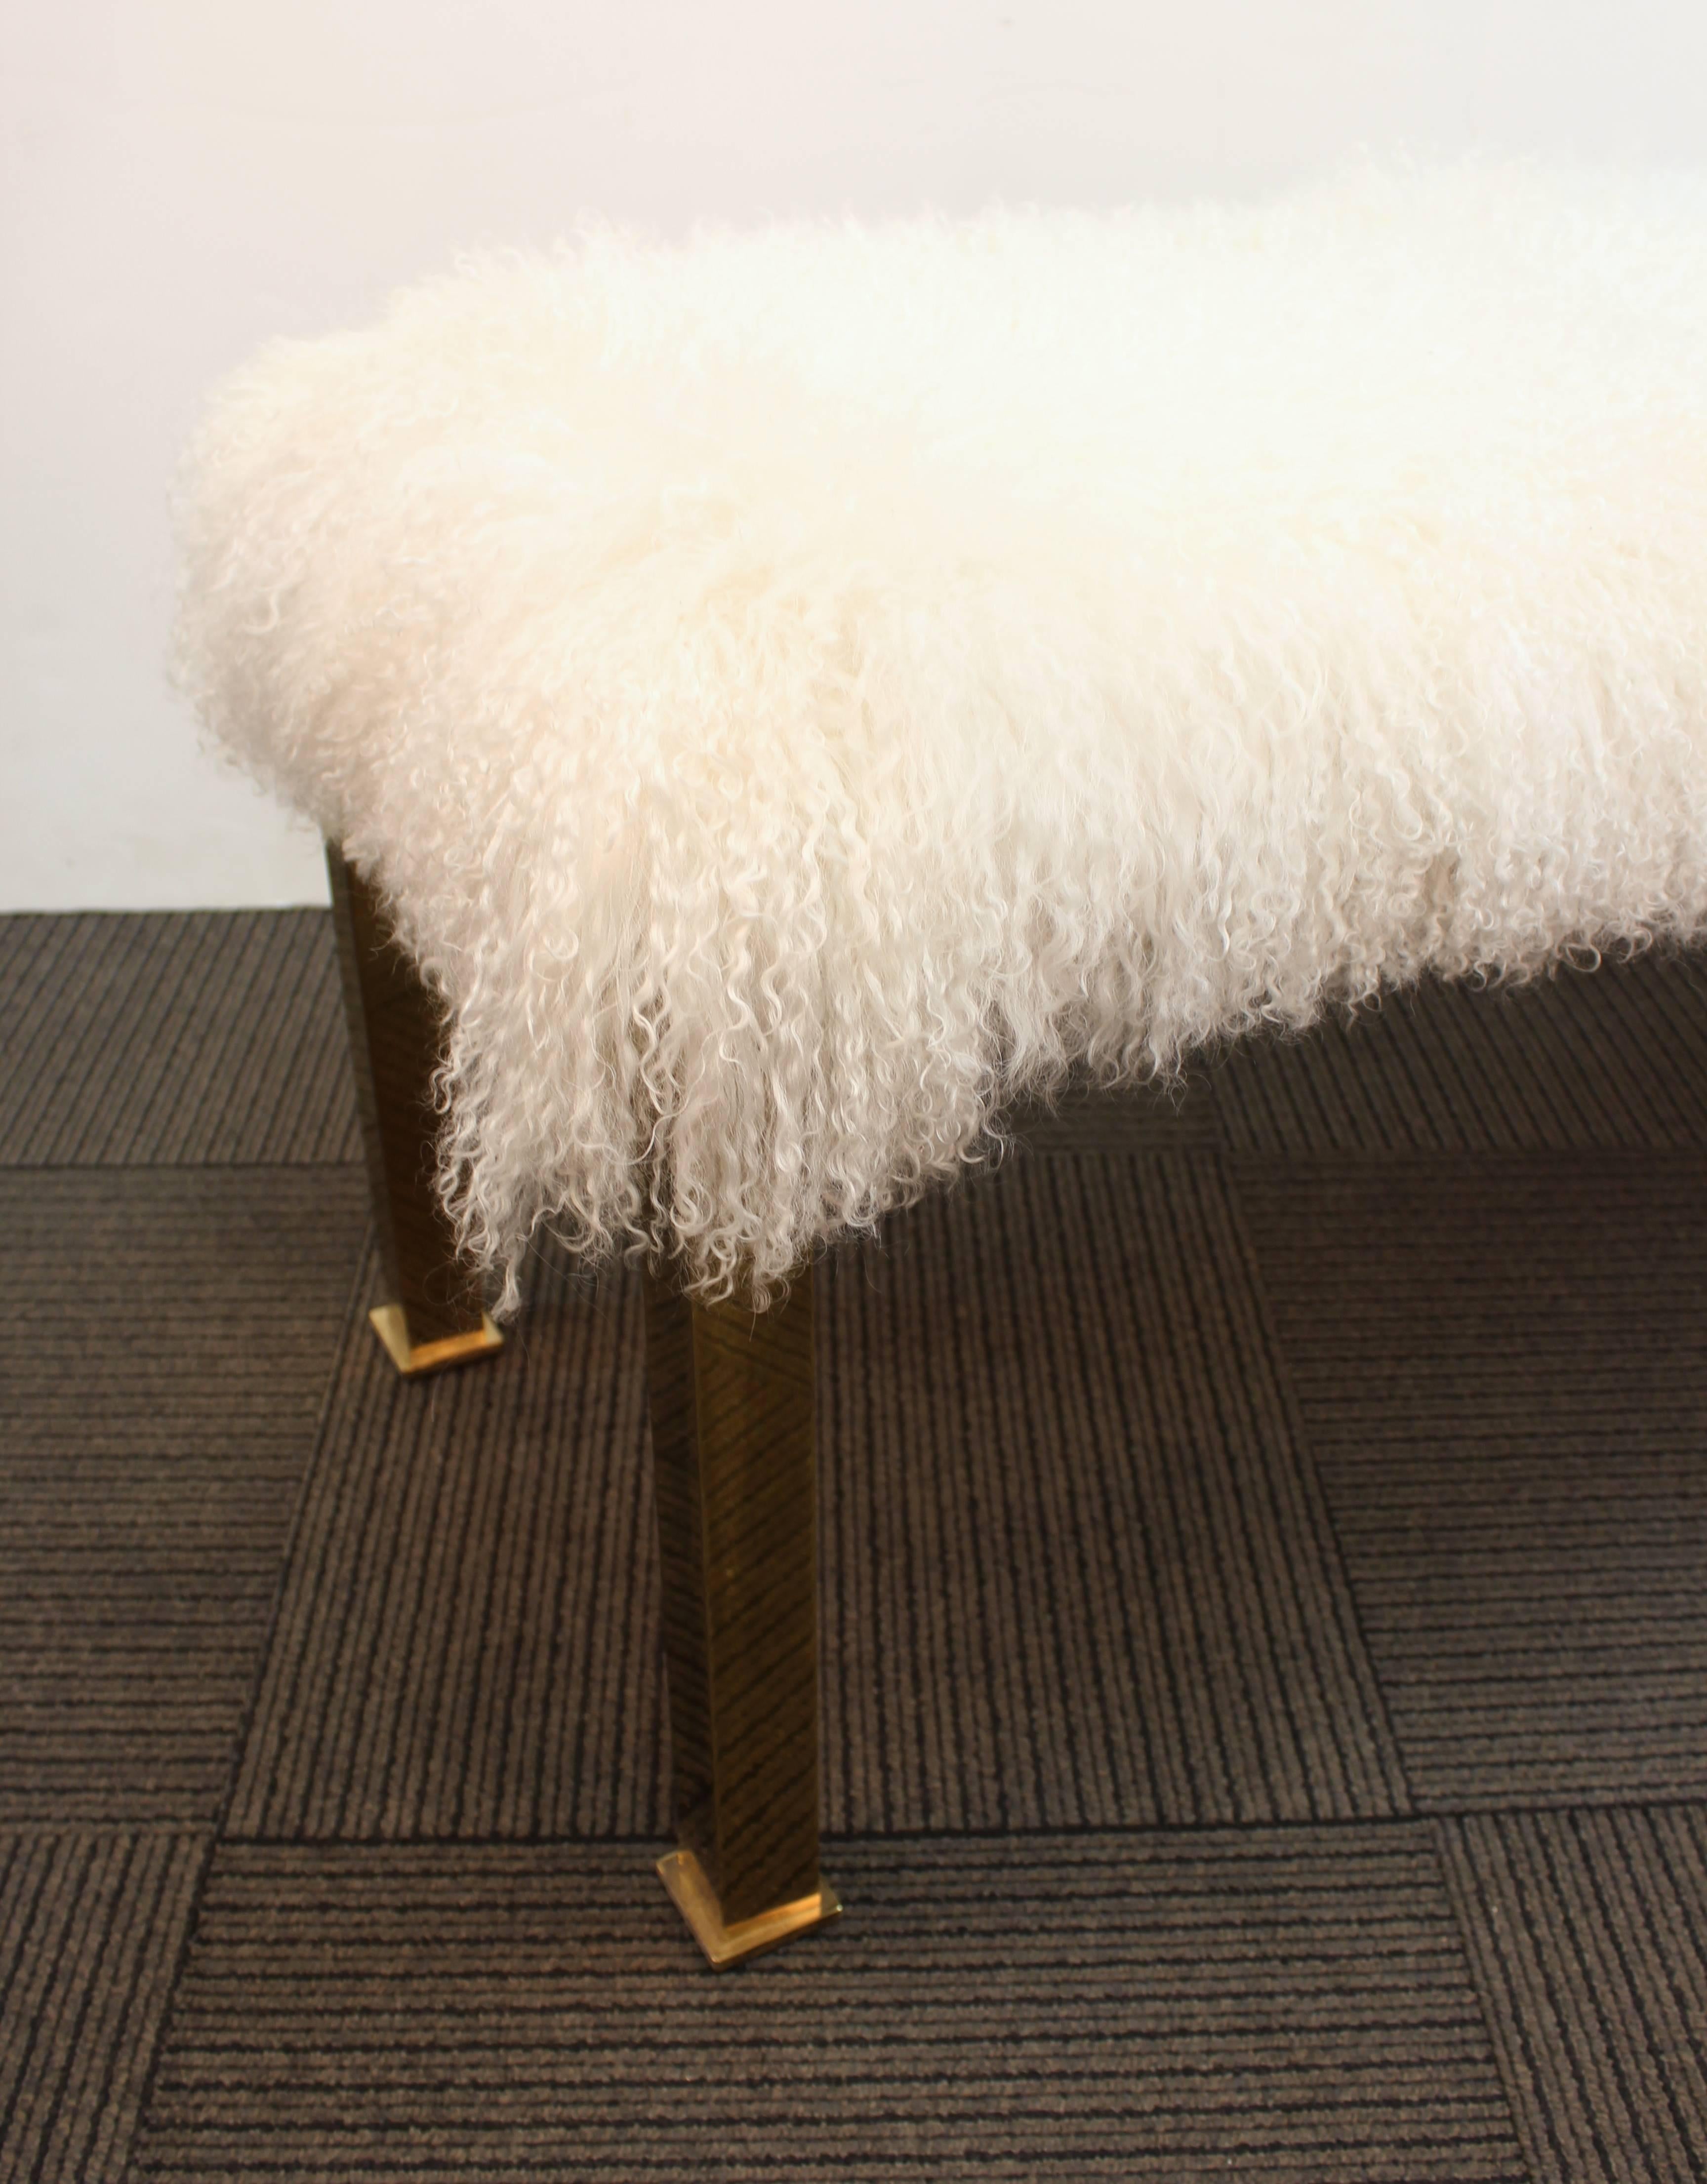 Hollywood Regency Parsons style bench with polished brass legs and curly Mongolian lambs wool upholstery. The legs feature a stepped detail. This piece is in good vintage condition and has wear consistent with age and use.